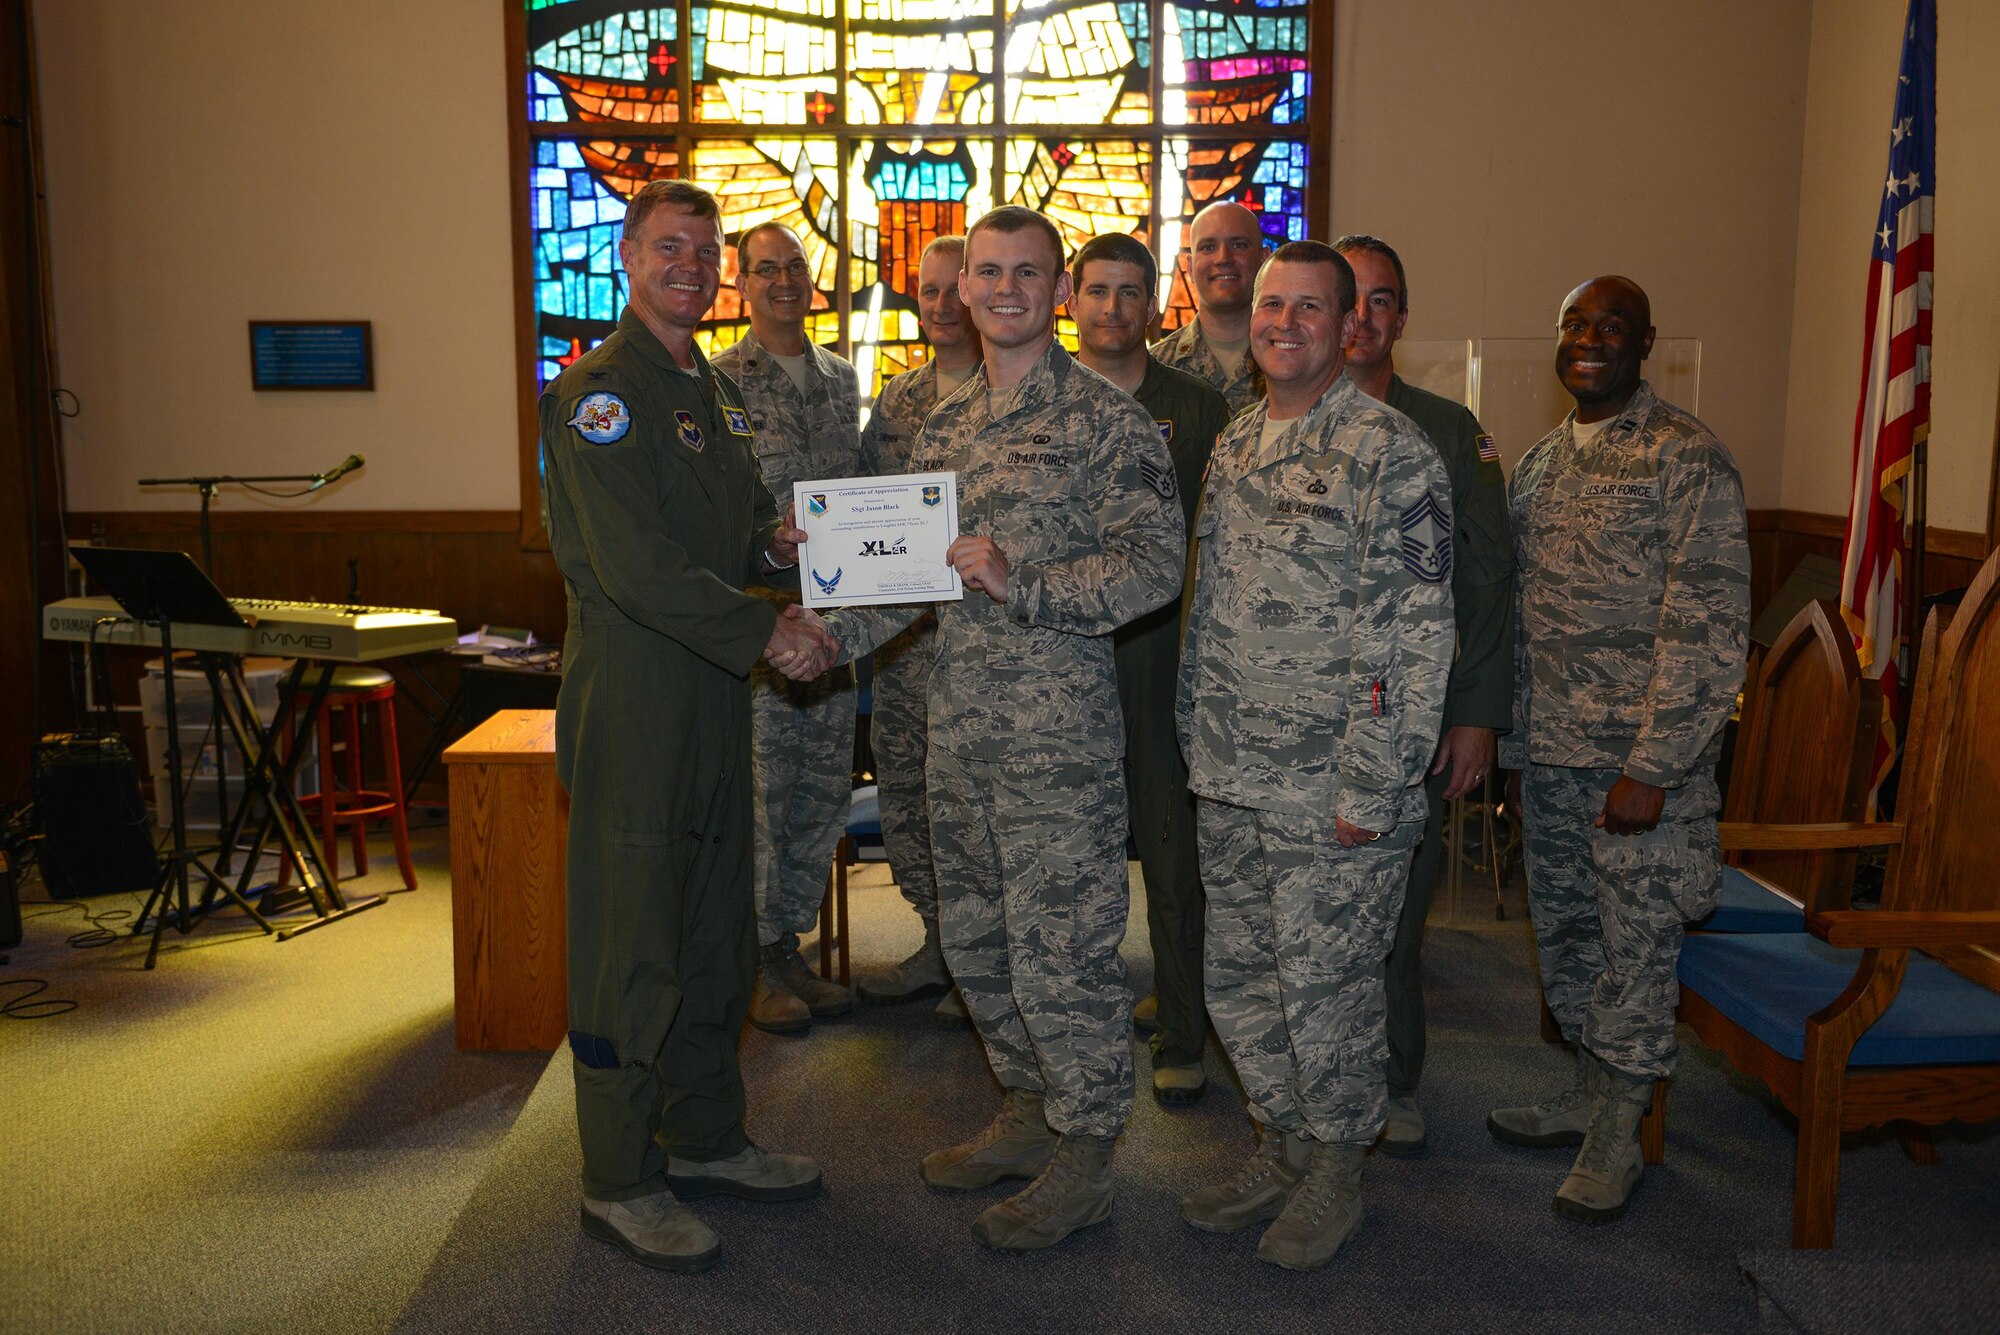 U.S. Air Force Staff Sgt. Jason Black, 47th Flying Training Wing Chapel plans and programs NCO in charge, (center), accepts the “XLer of the Week” award from Col. Thomas Shank, 47th Flying Training Wing commander (left), and Chief Master Sgt. Allen Turk, 47th Operations Support Squadron superintendent (right), on Laughlin Air Force Base, Texas, May 25, 2017. The XLer is a weekly award chosen by wing leadership and is presented to those who consistently make outstanding contributions to their unit and installation. (U.S. Air Force photo/Airman 1st Class Benjamin N. Valmoja)